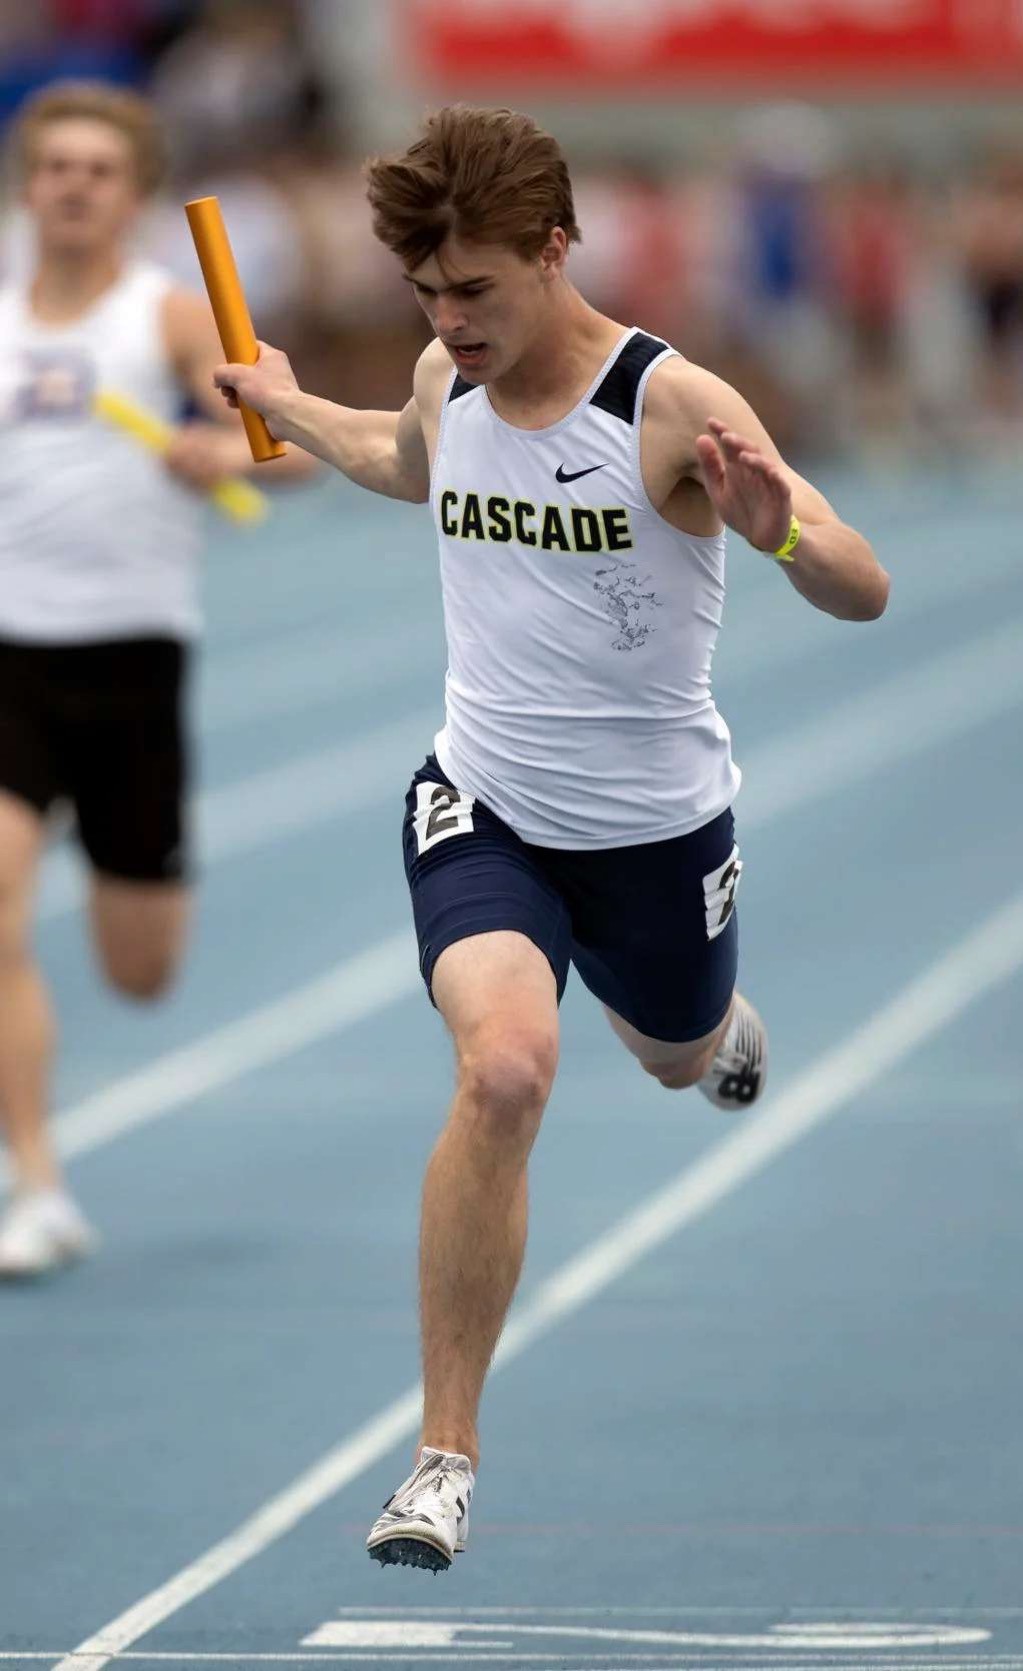 this is a photo of me running at the state track meet